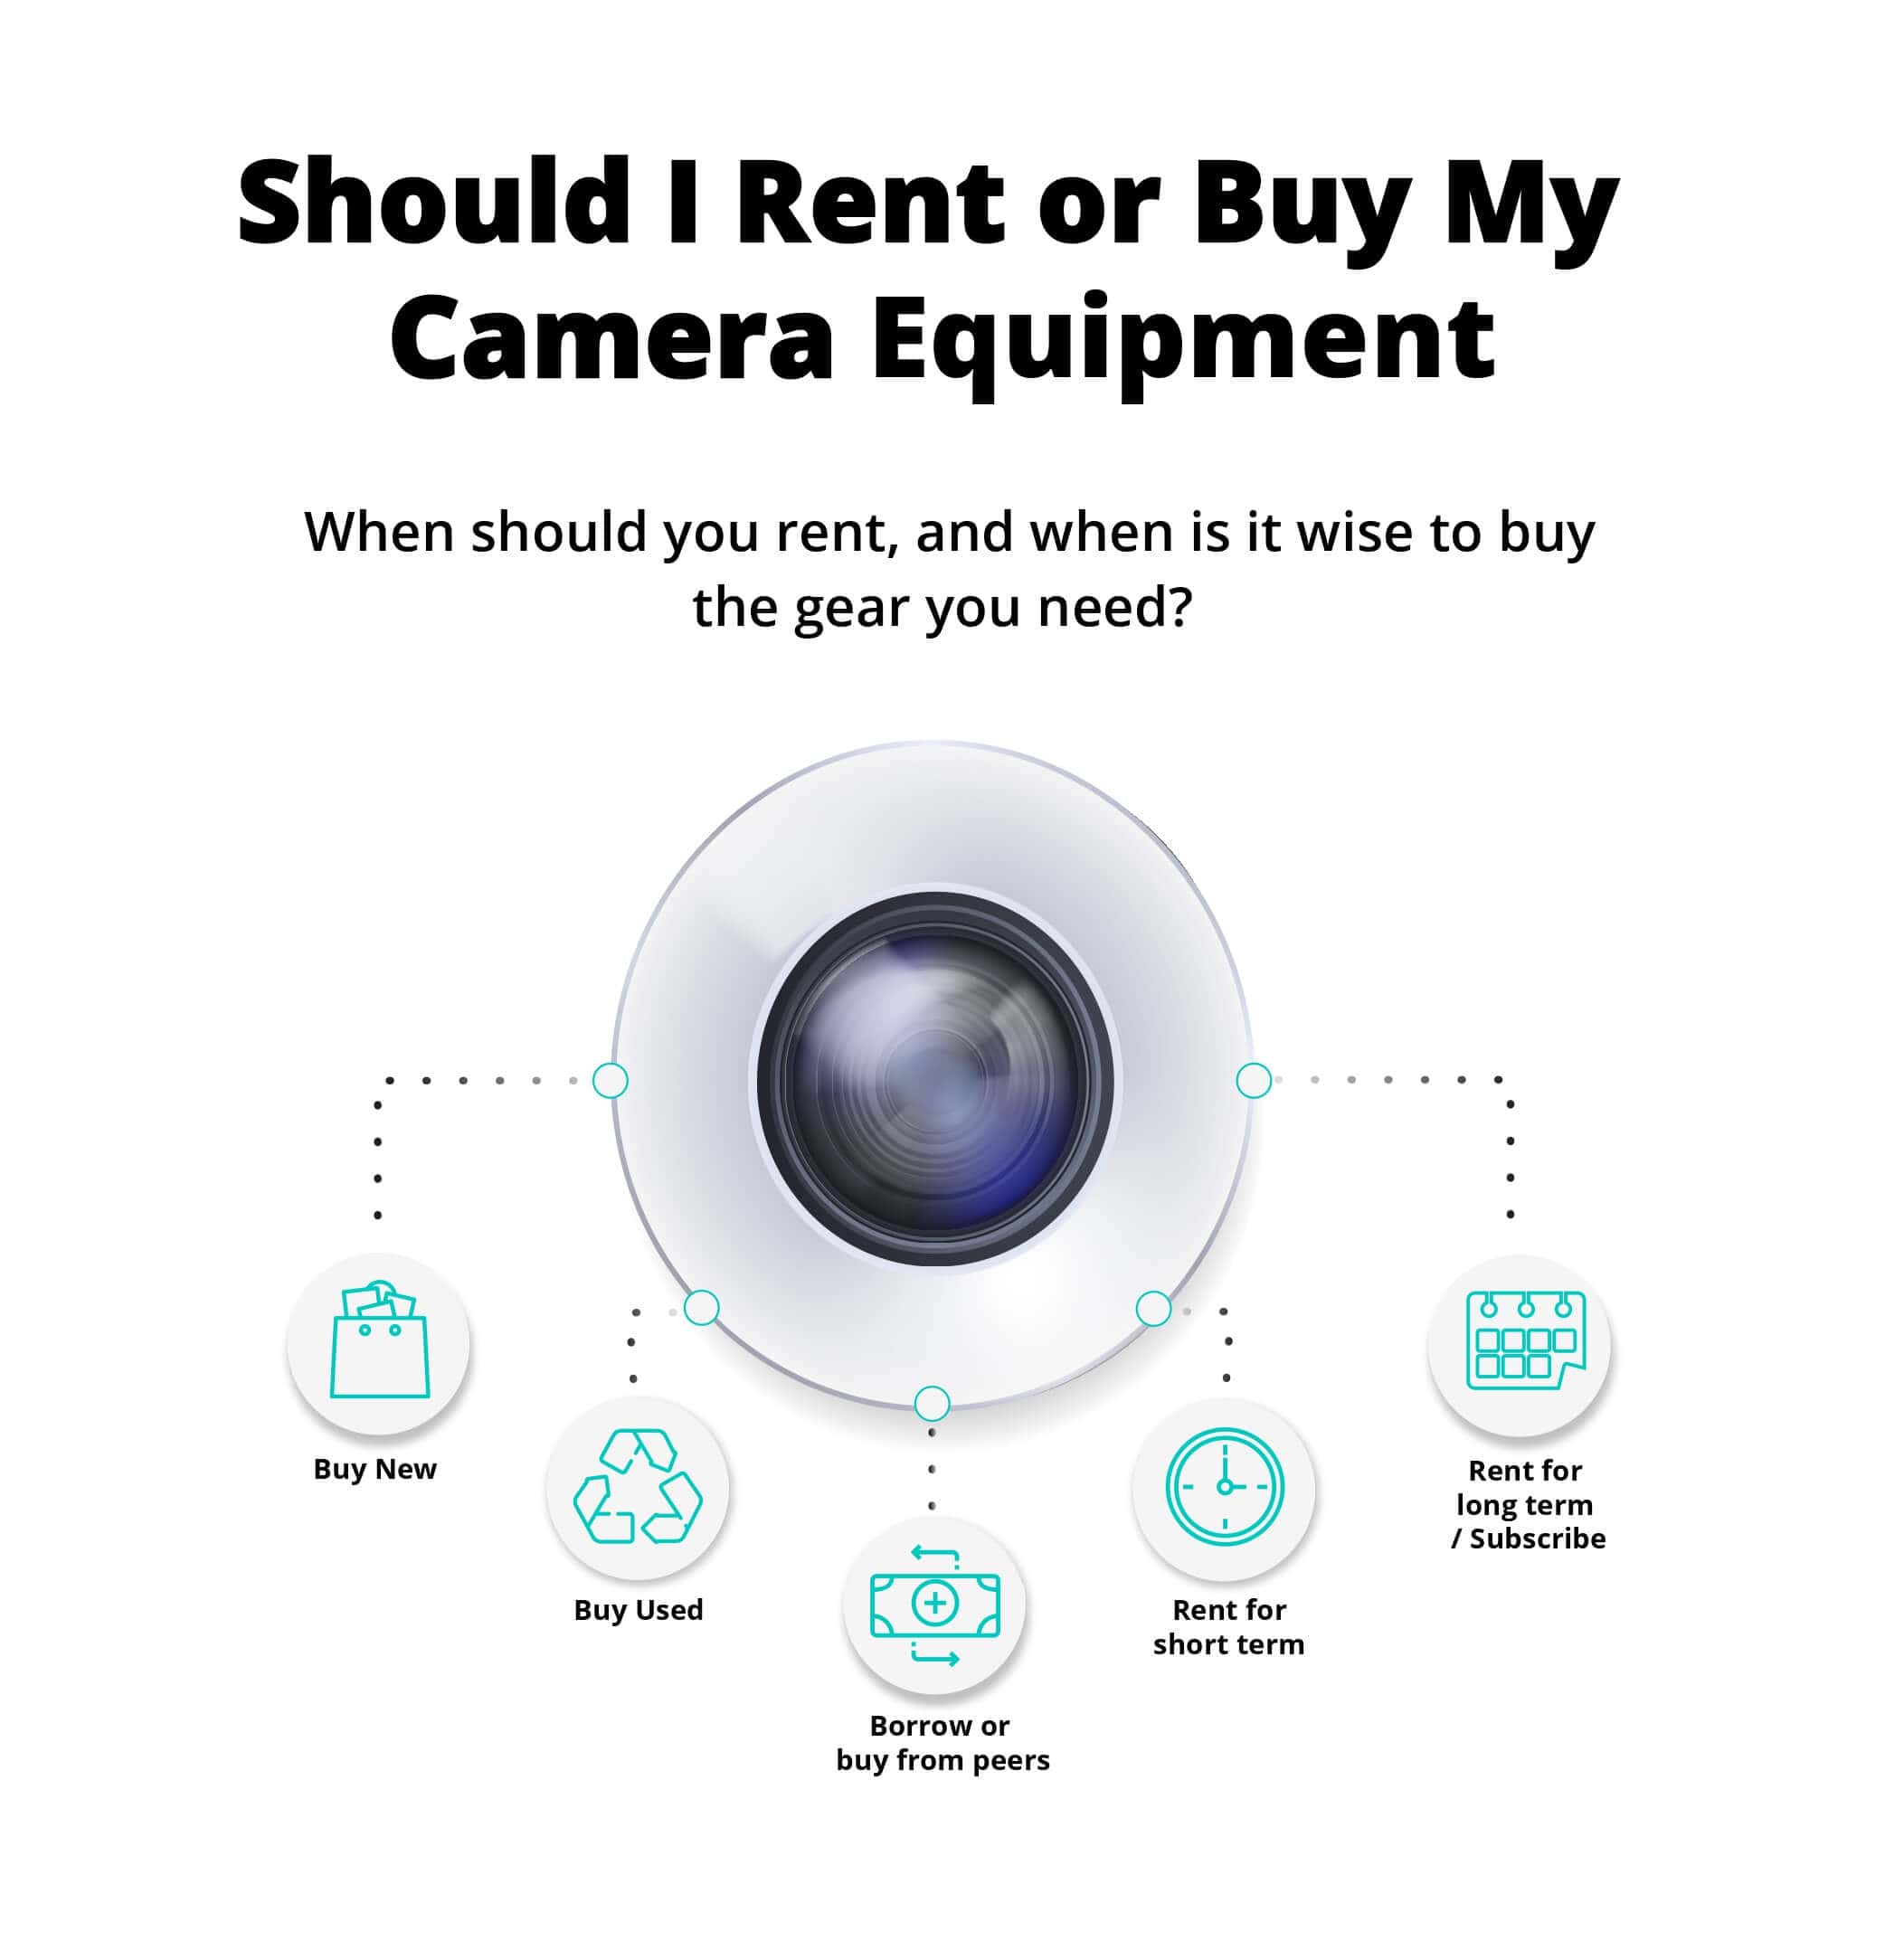 When to buy, rent or subscribe to my video and camera equipment?